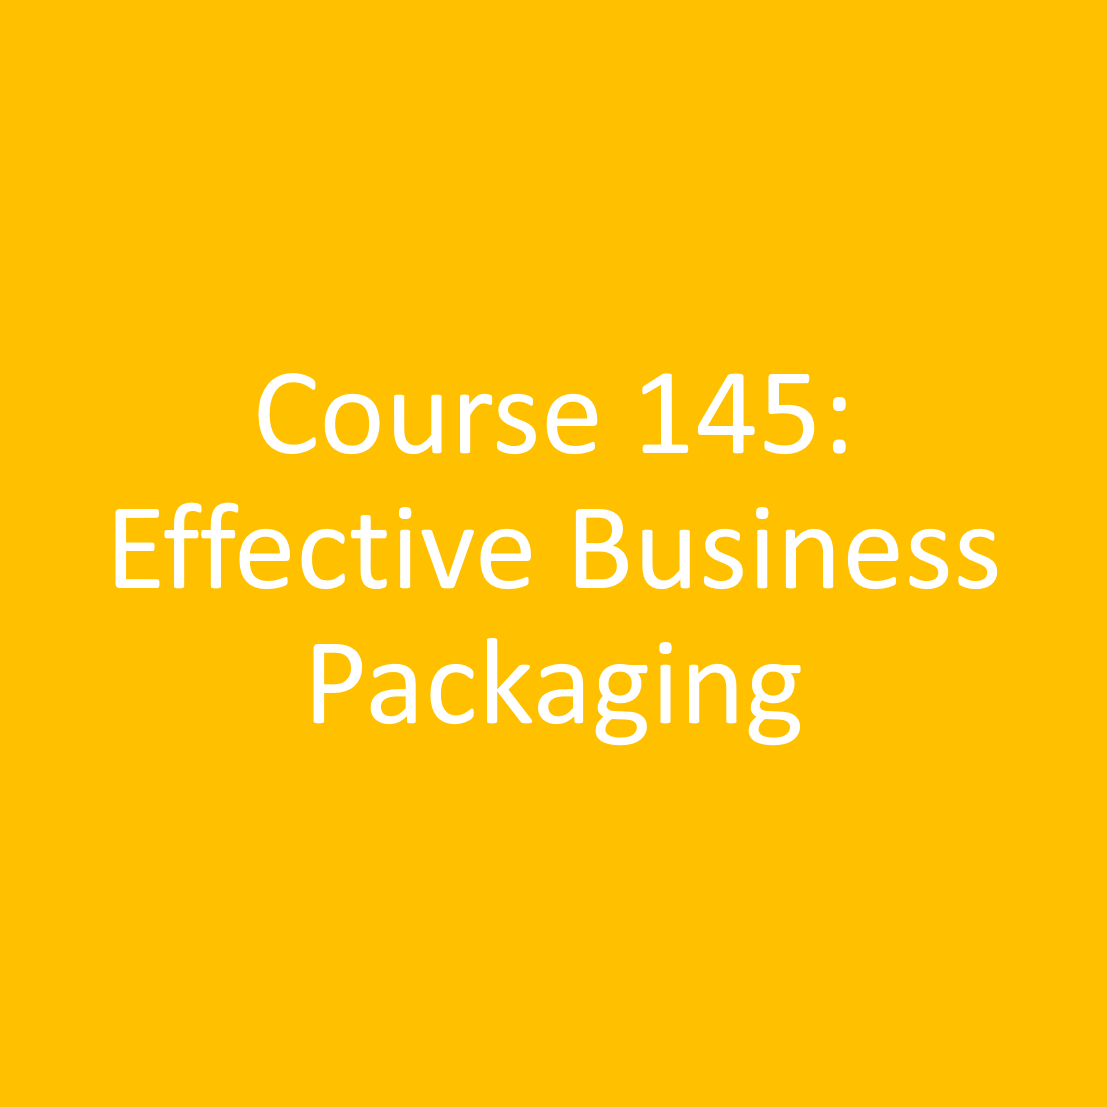 Course 145 - Effective Business Packaging